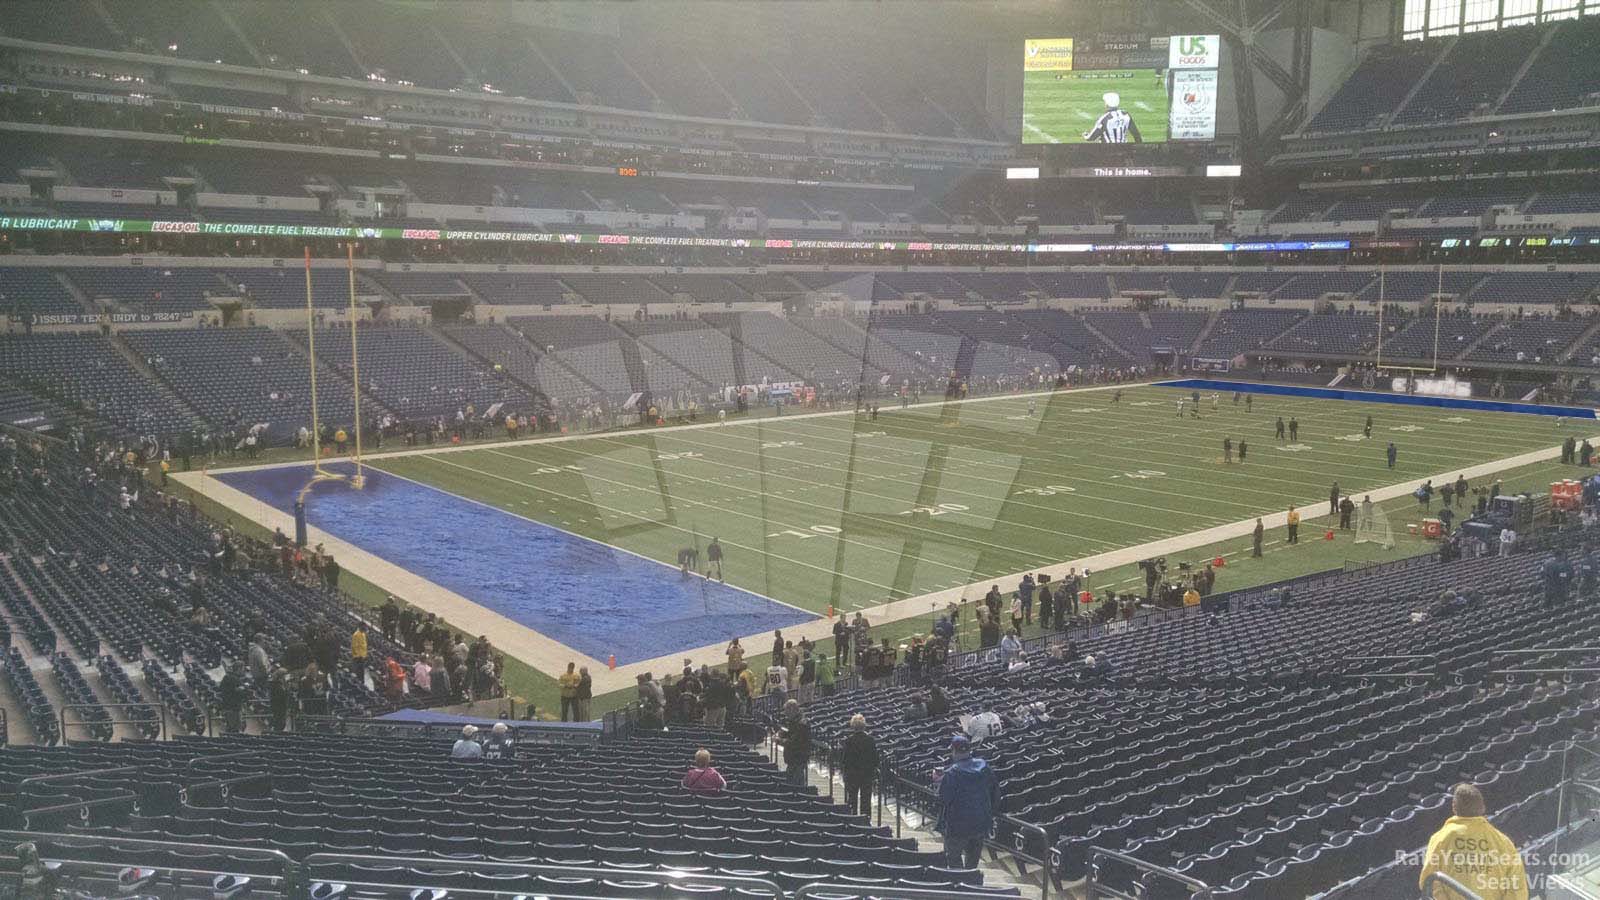 section 247, row 1 seat view  for football - lucas oil stadium